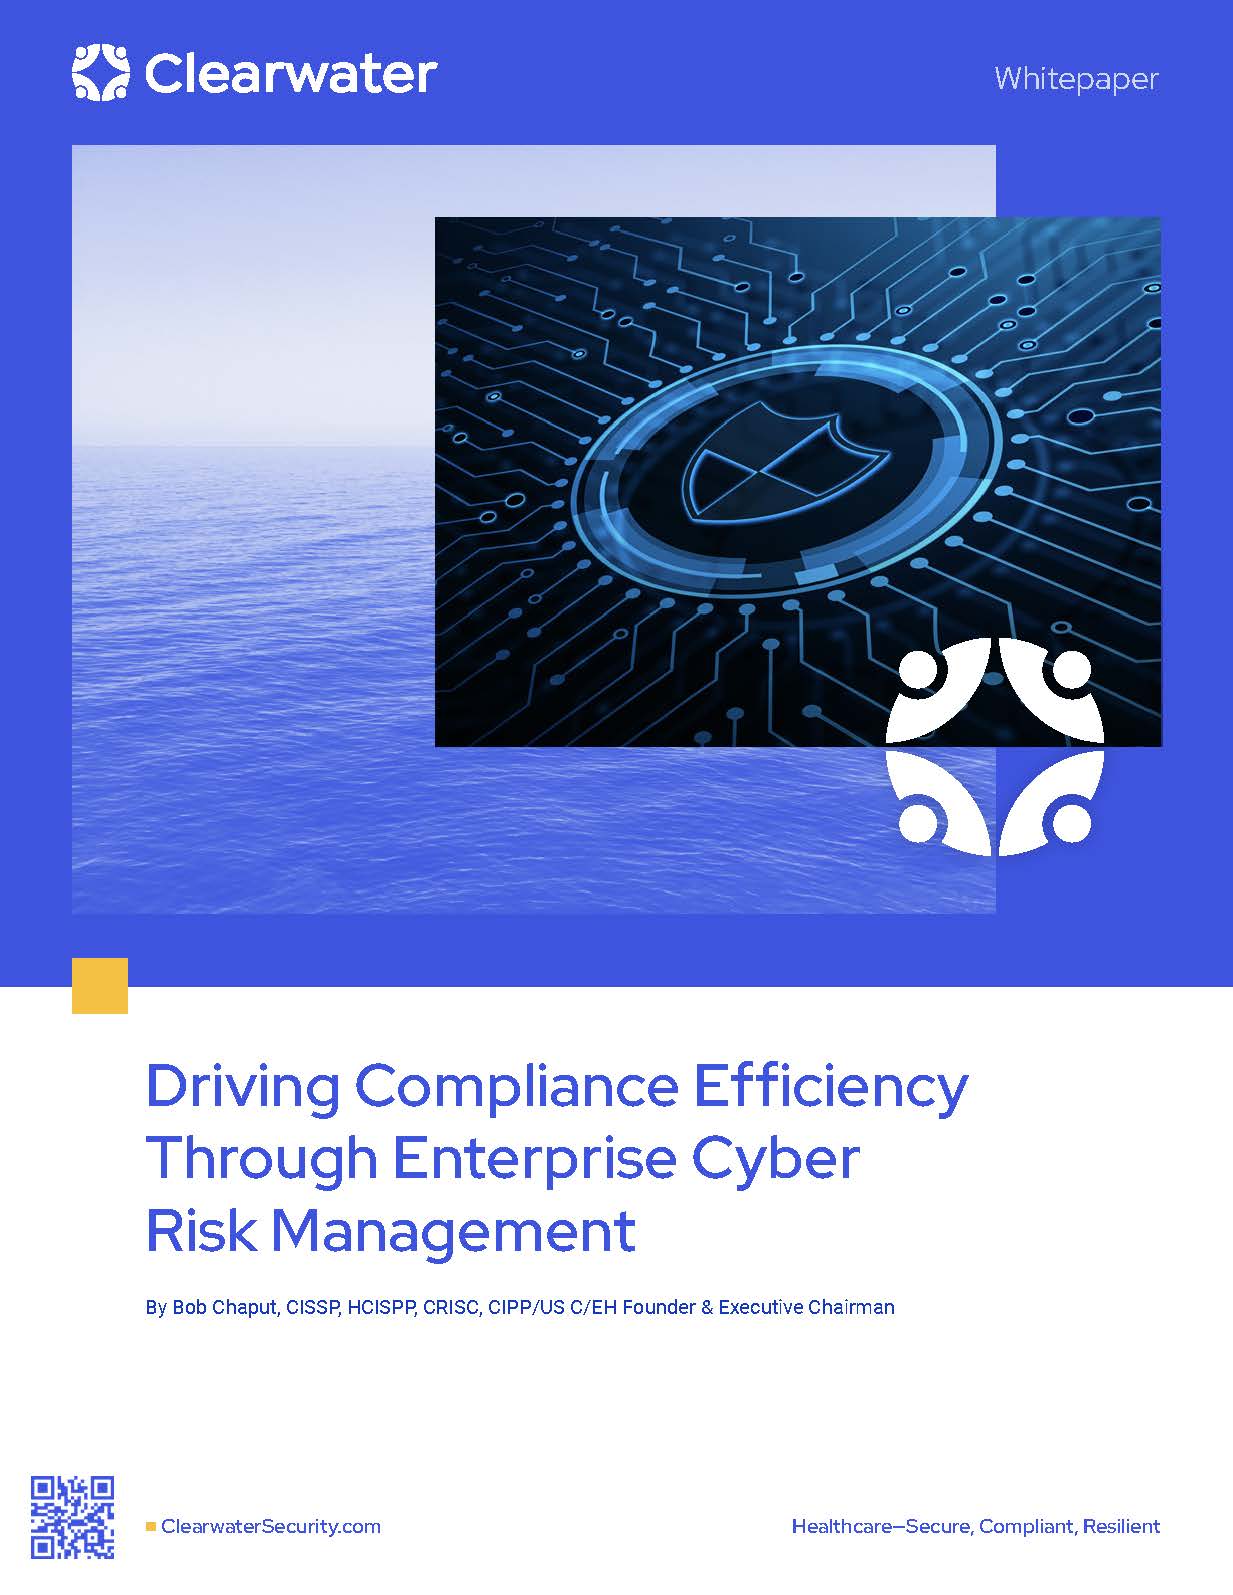 Driving Compliance Efficiency Through Enterprise Cyber Risk Management by Clearwater